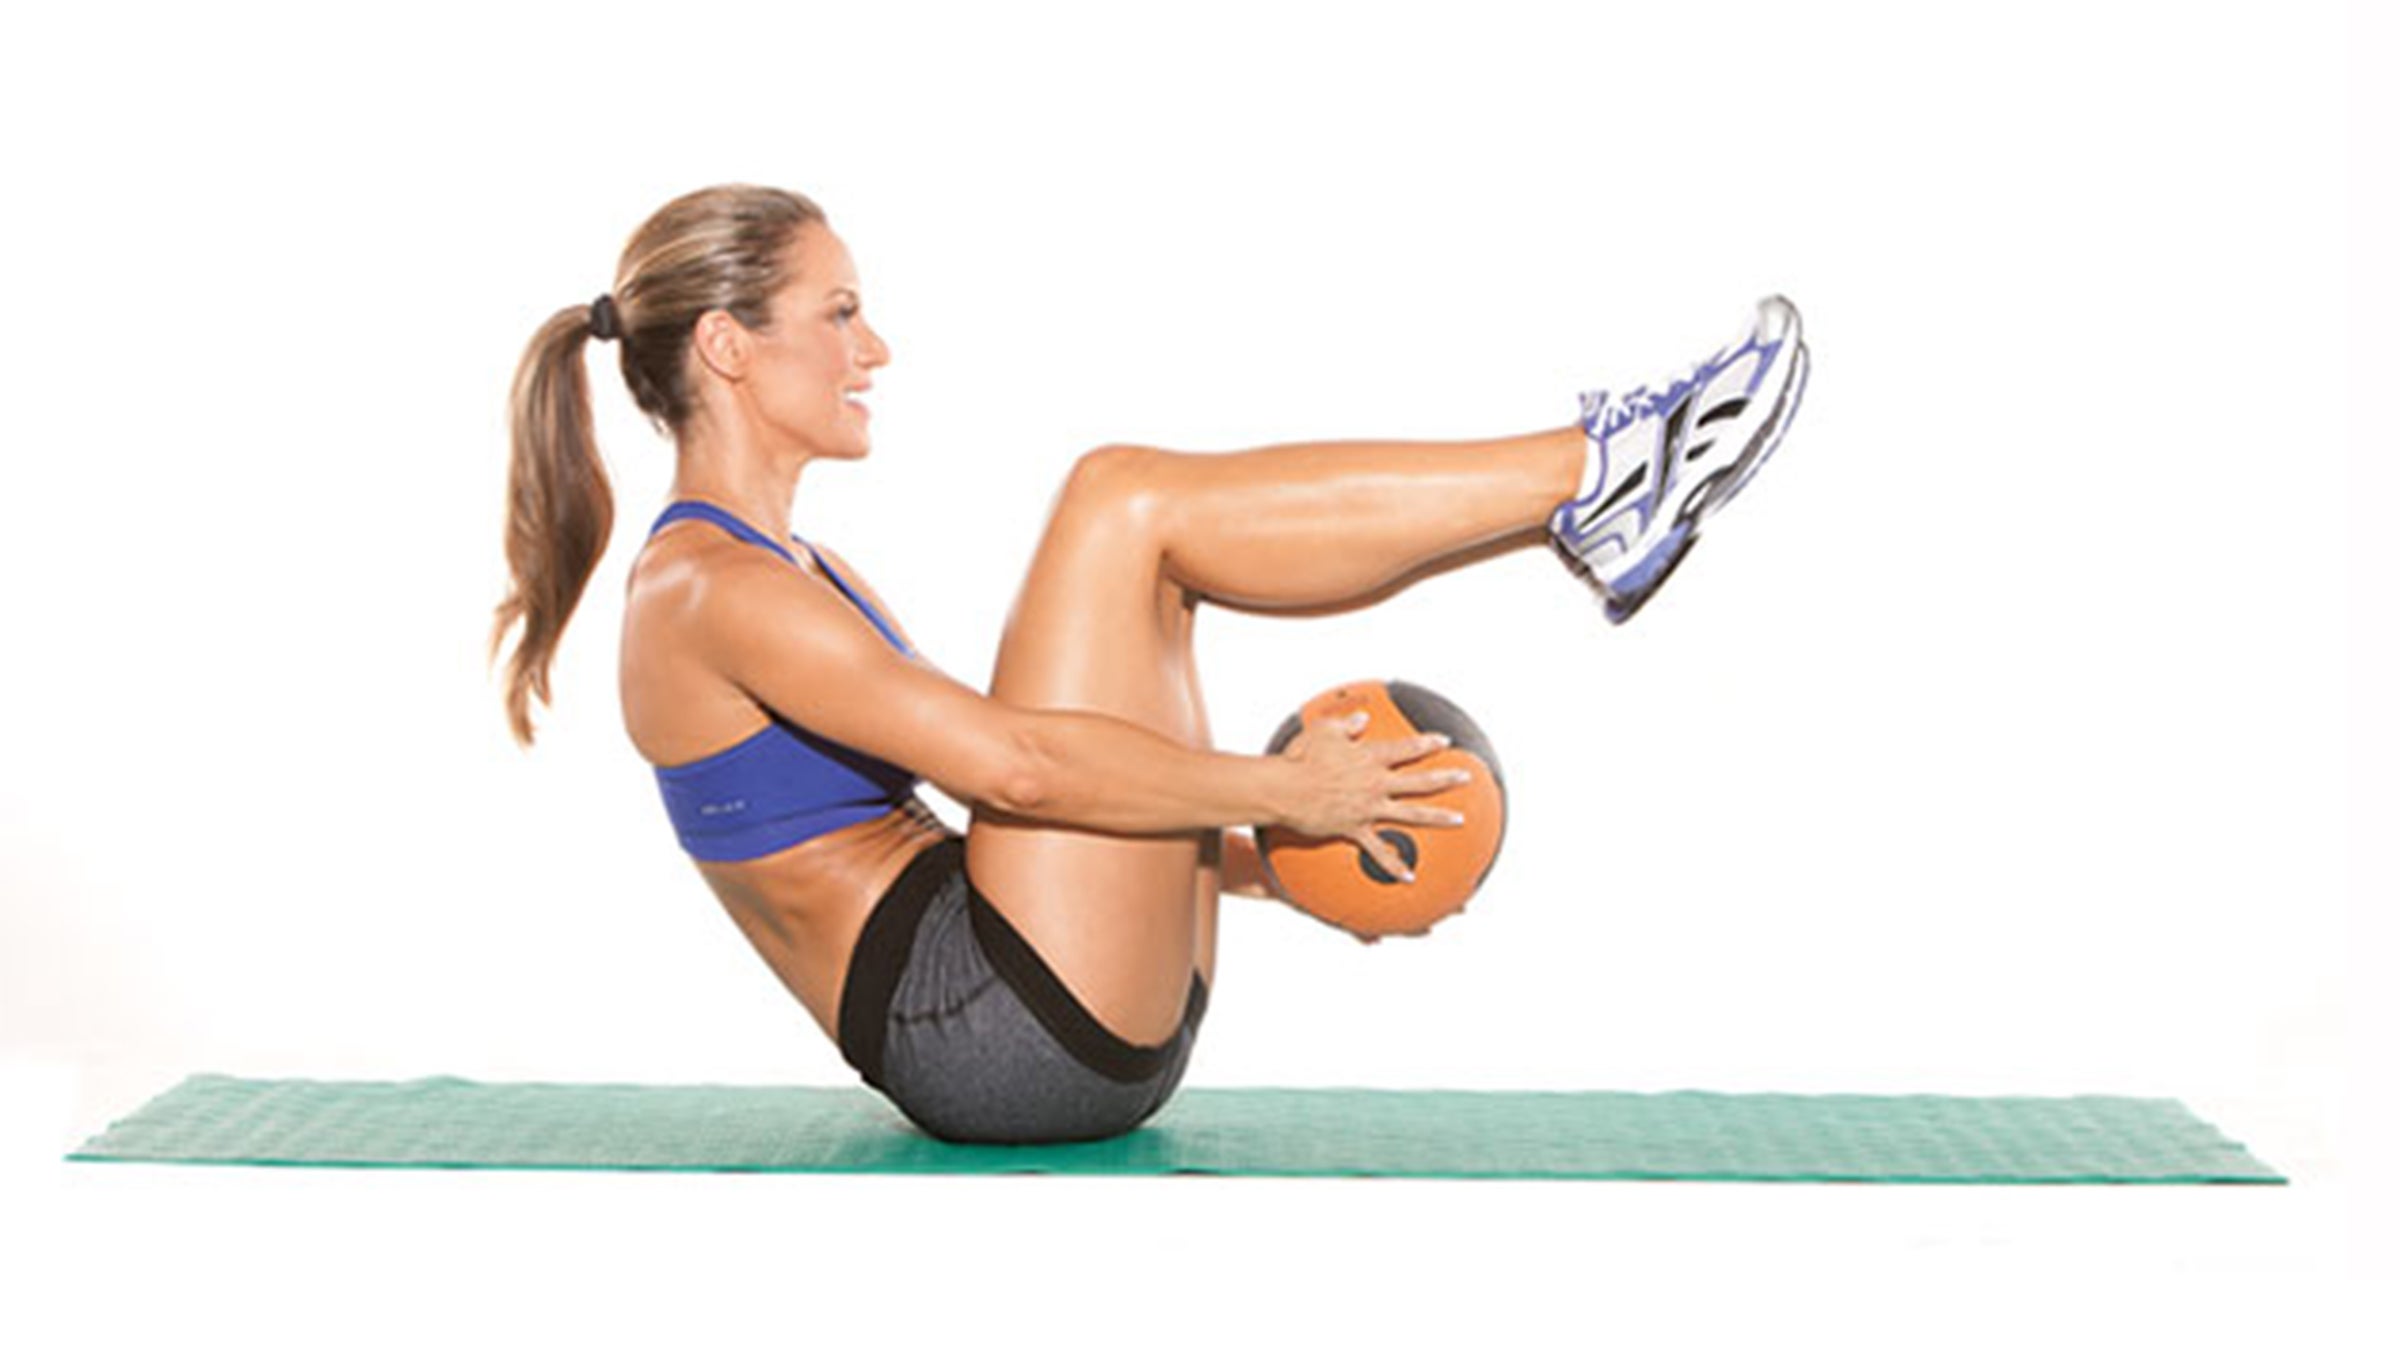 Ways To Use a Stability Ball for Exercise